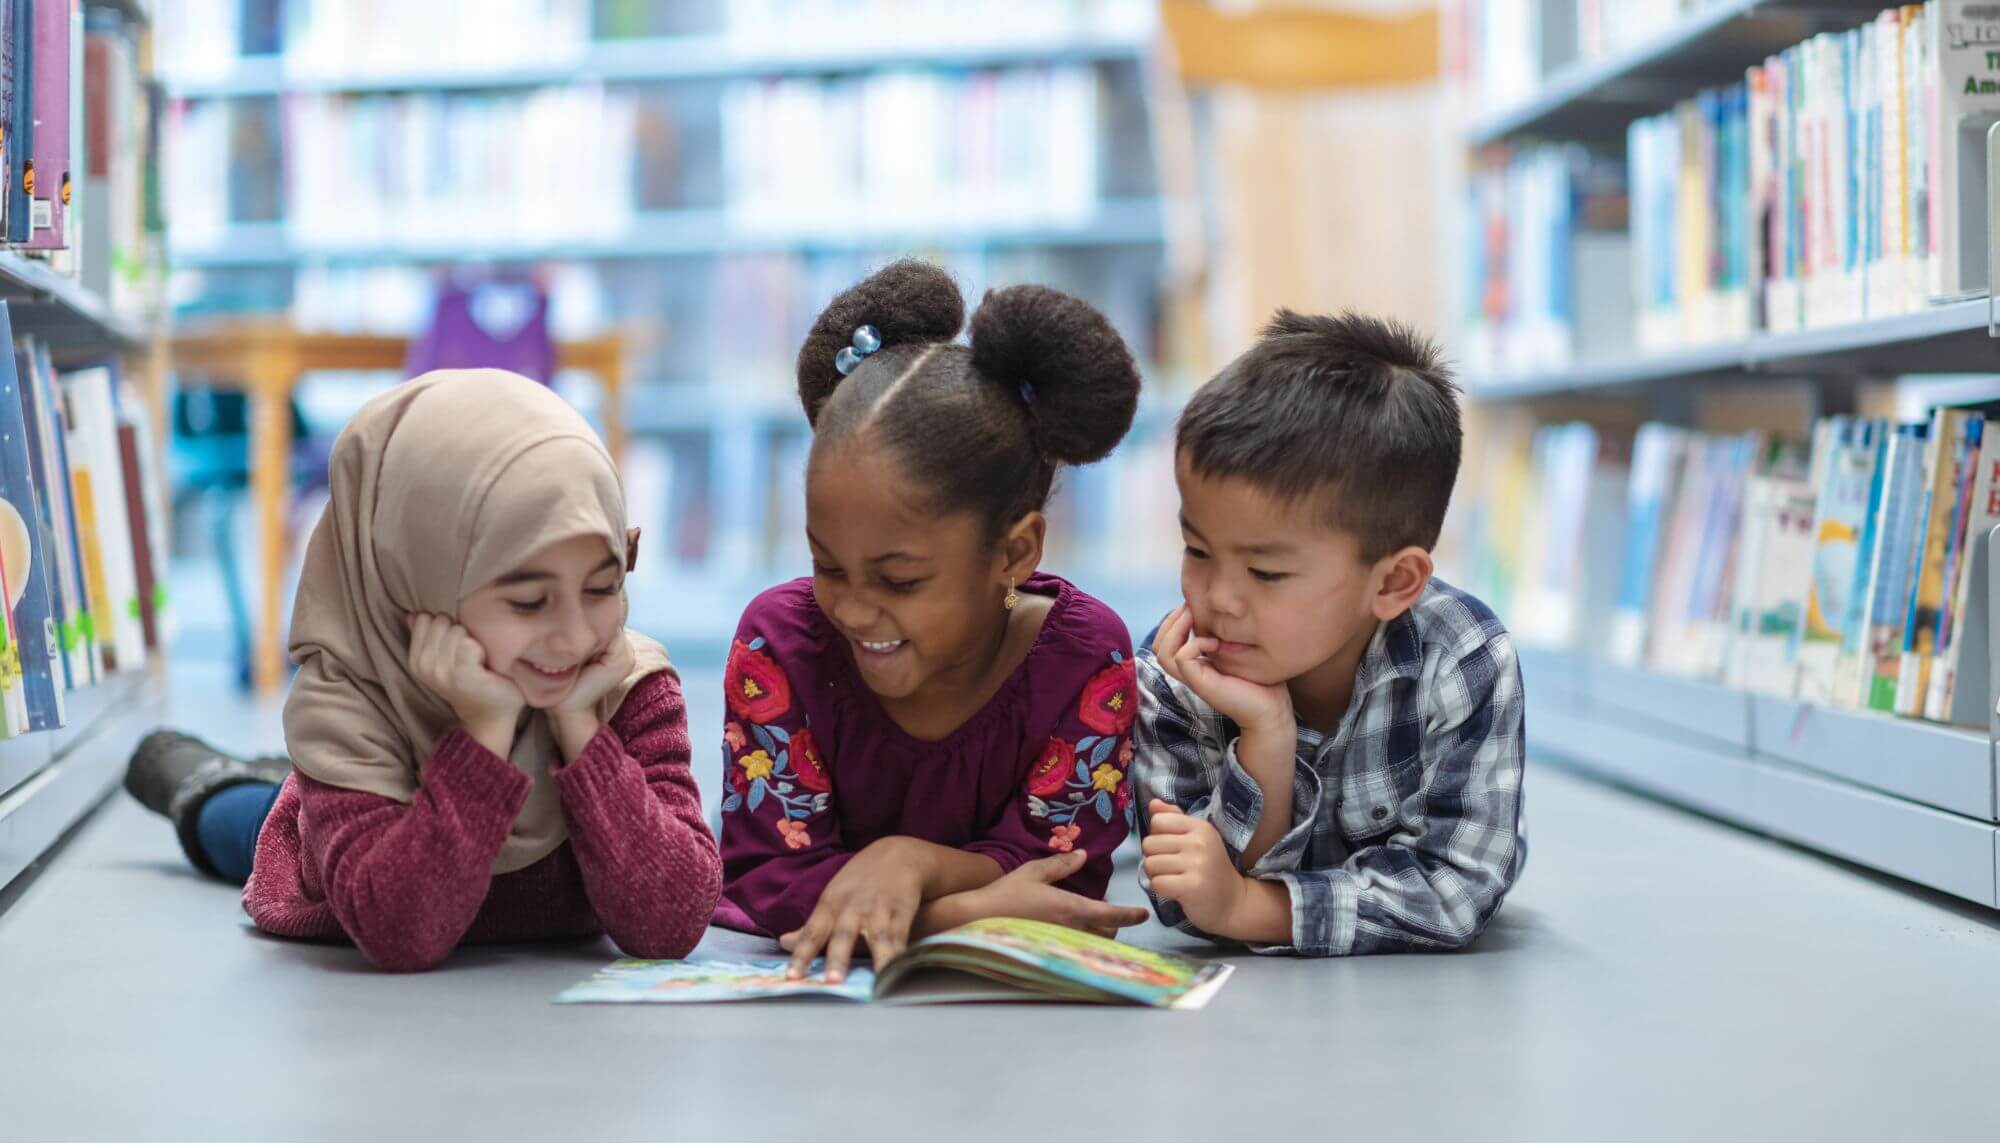 Three five-to-six-year-old children - a Muslim girl, a Black girl, and an Asian boy - lying on the ground of a library and reading a book together.